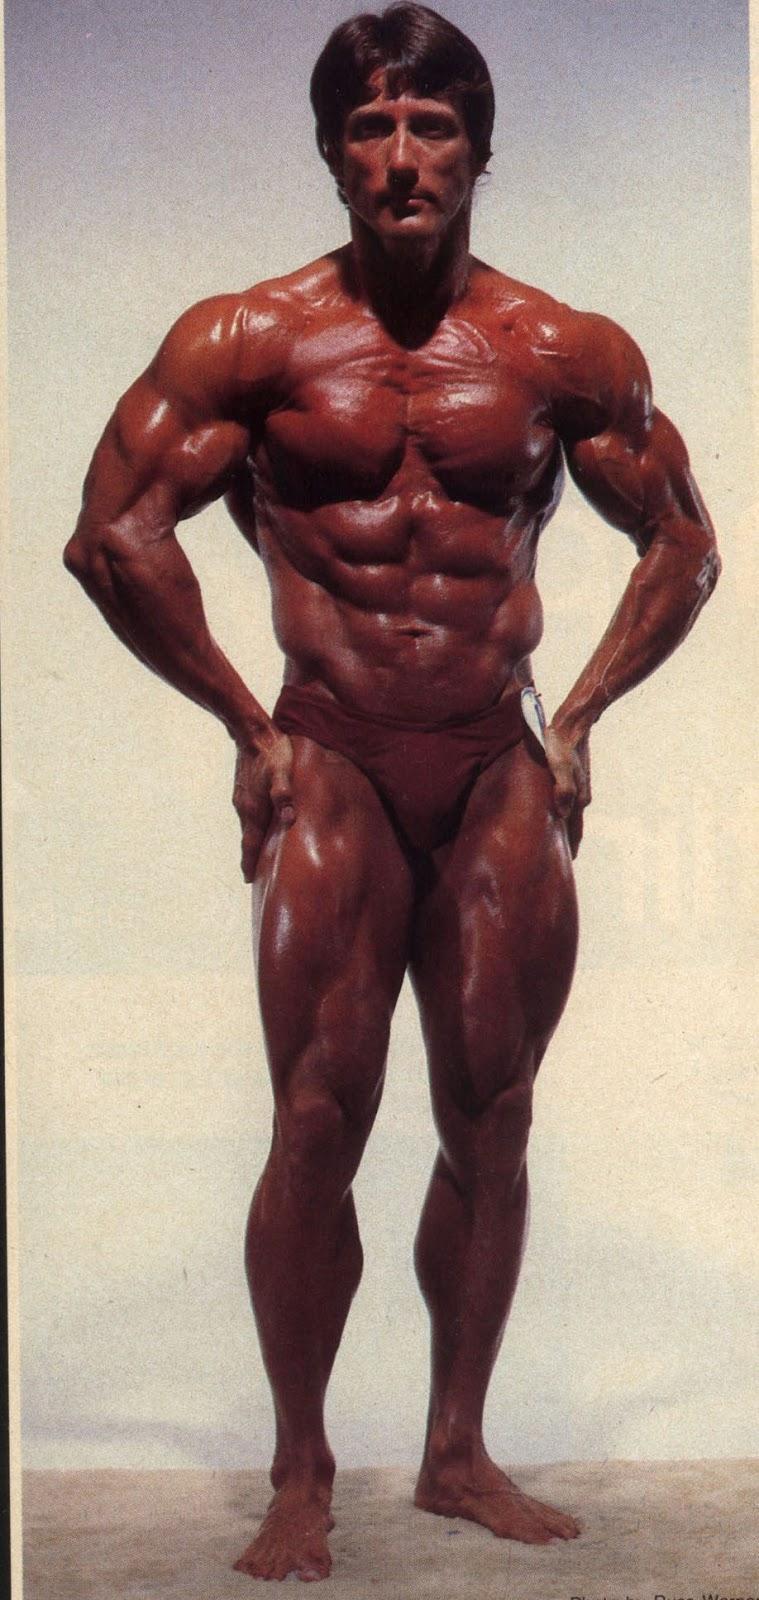 Could Mr. Olympia champion, Frank Zane, from 1977-1979, competed with  today's lineup of champions being under 200 pounds? He was one of the most  aesthetic and 'cut' bodybuilders ever. - Quora